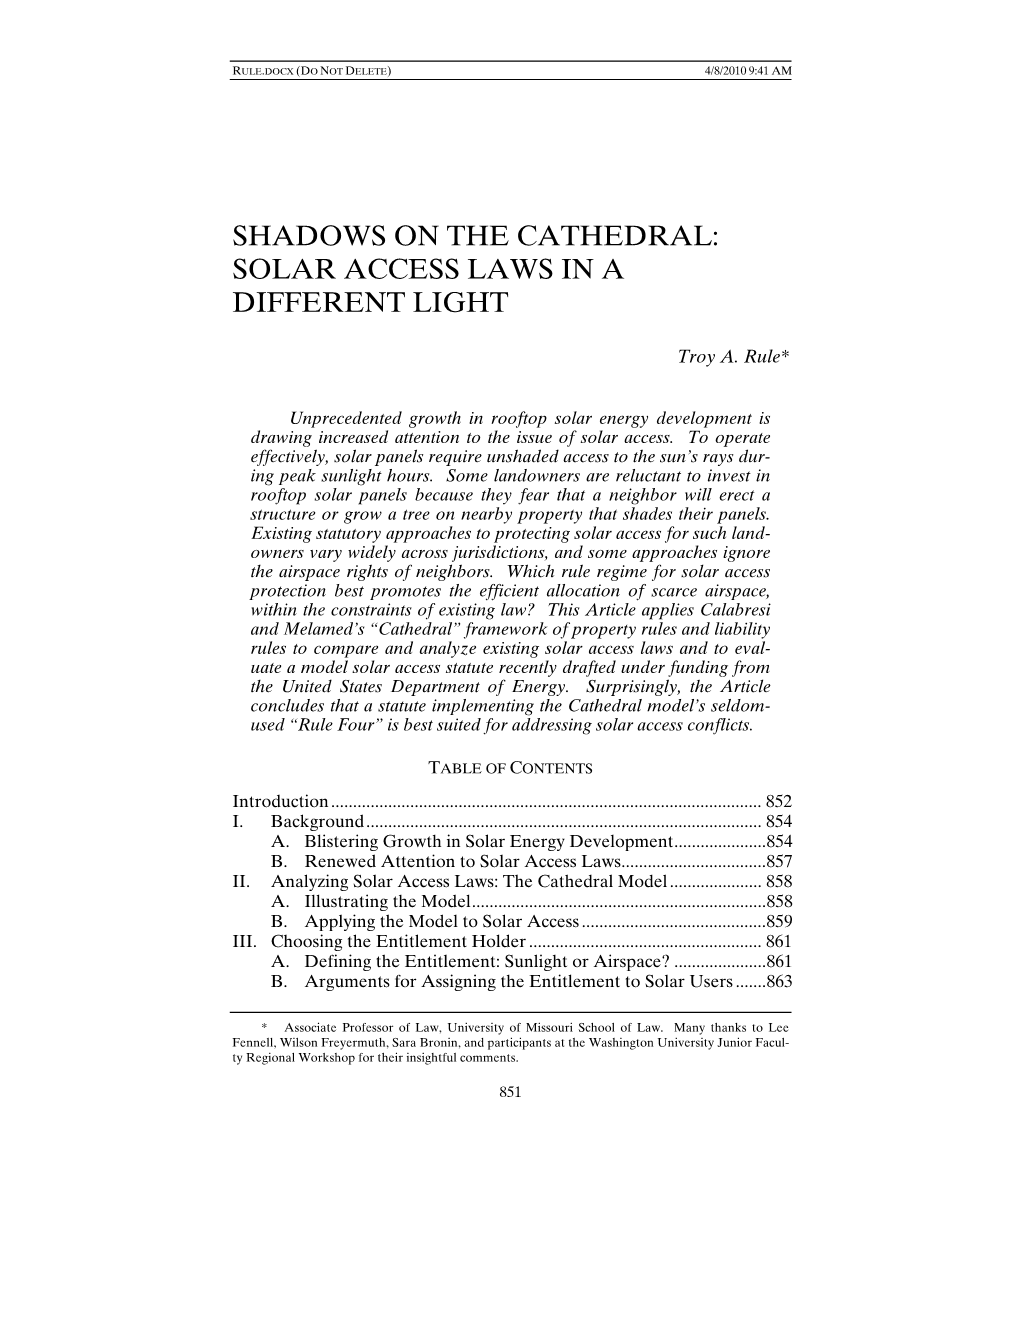 Shadows on the Cathedral: Solar Access Laws in a Different Light